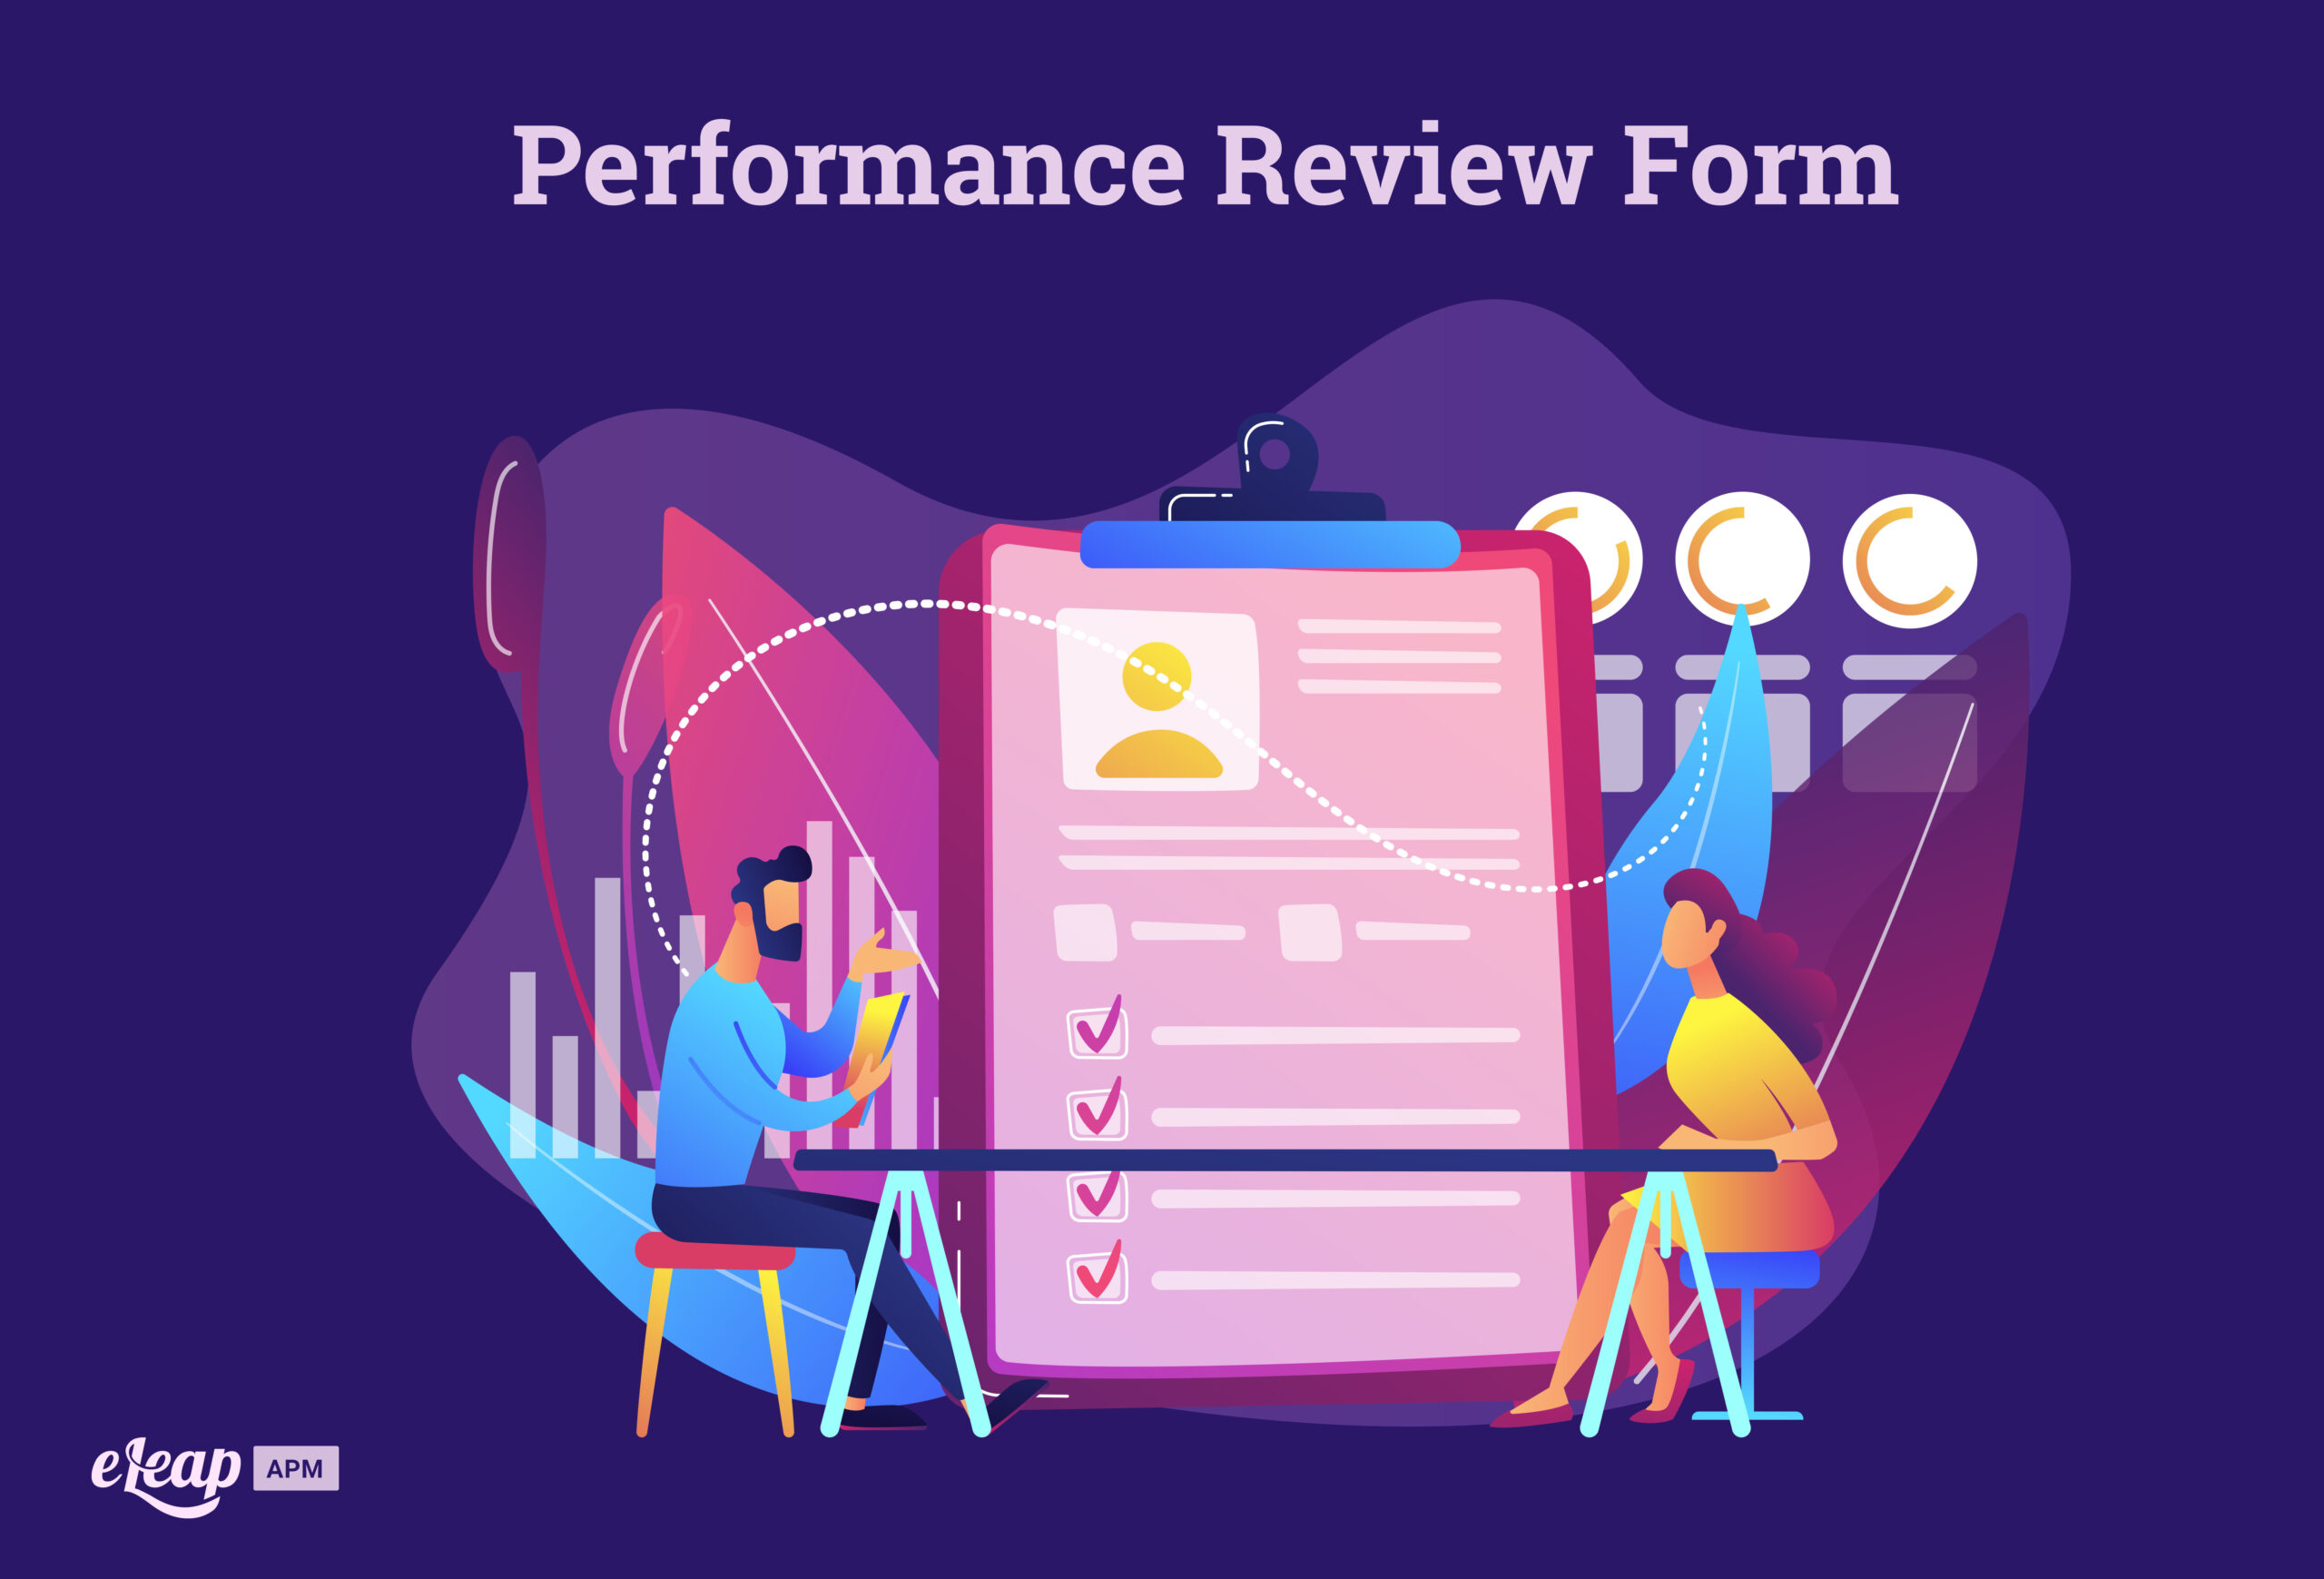 Performance Review Forms